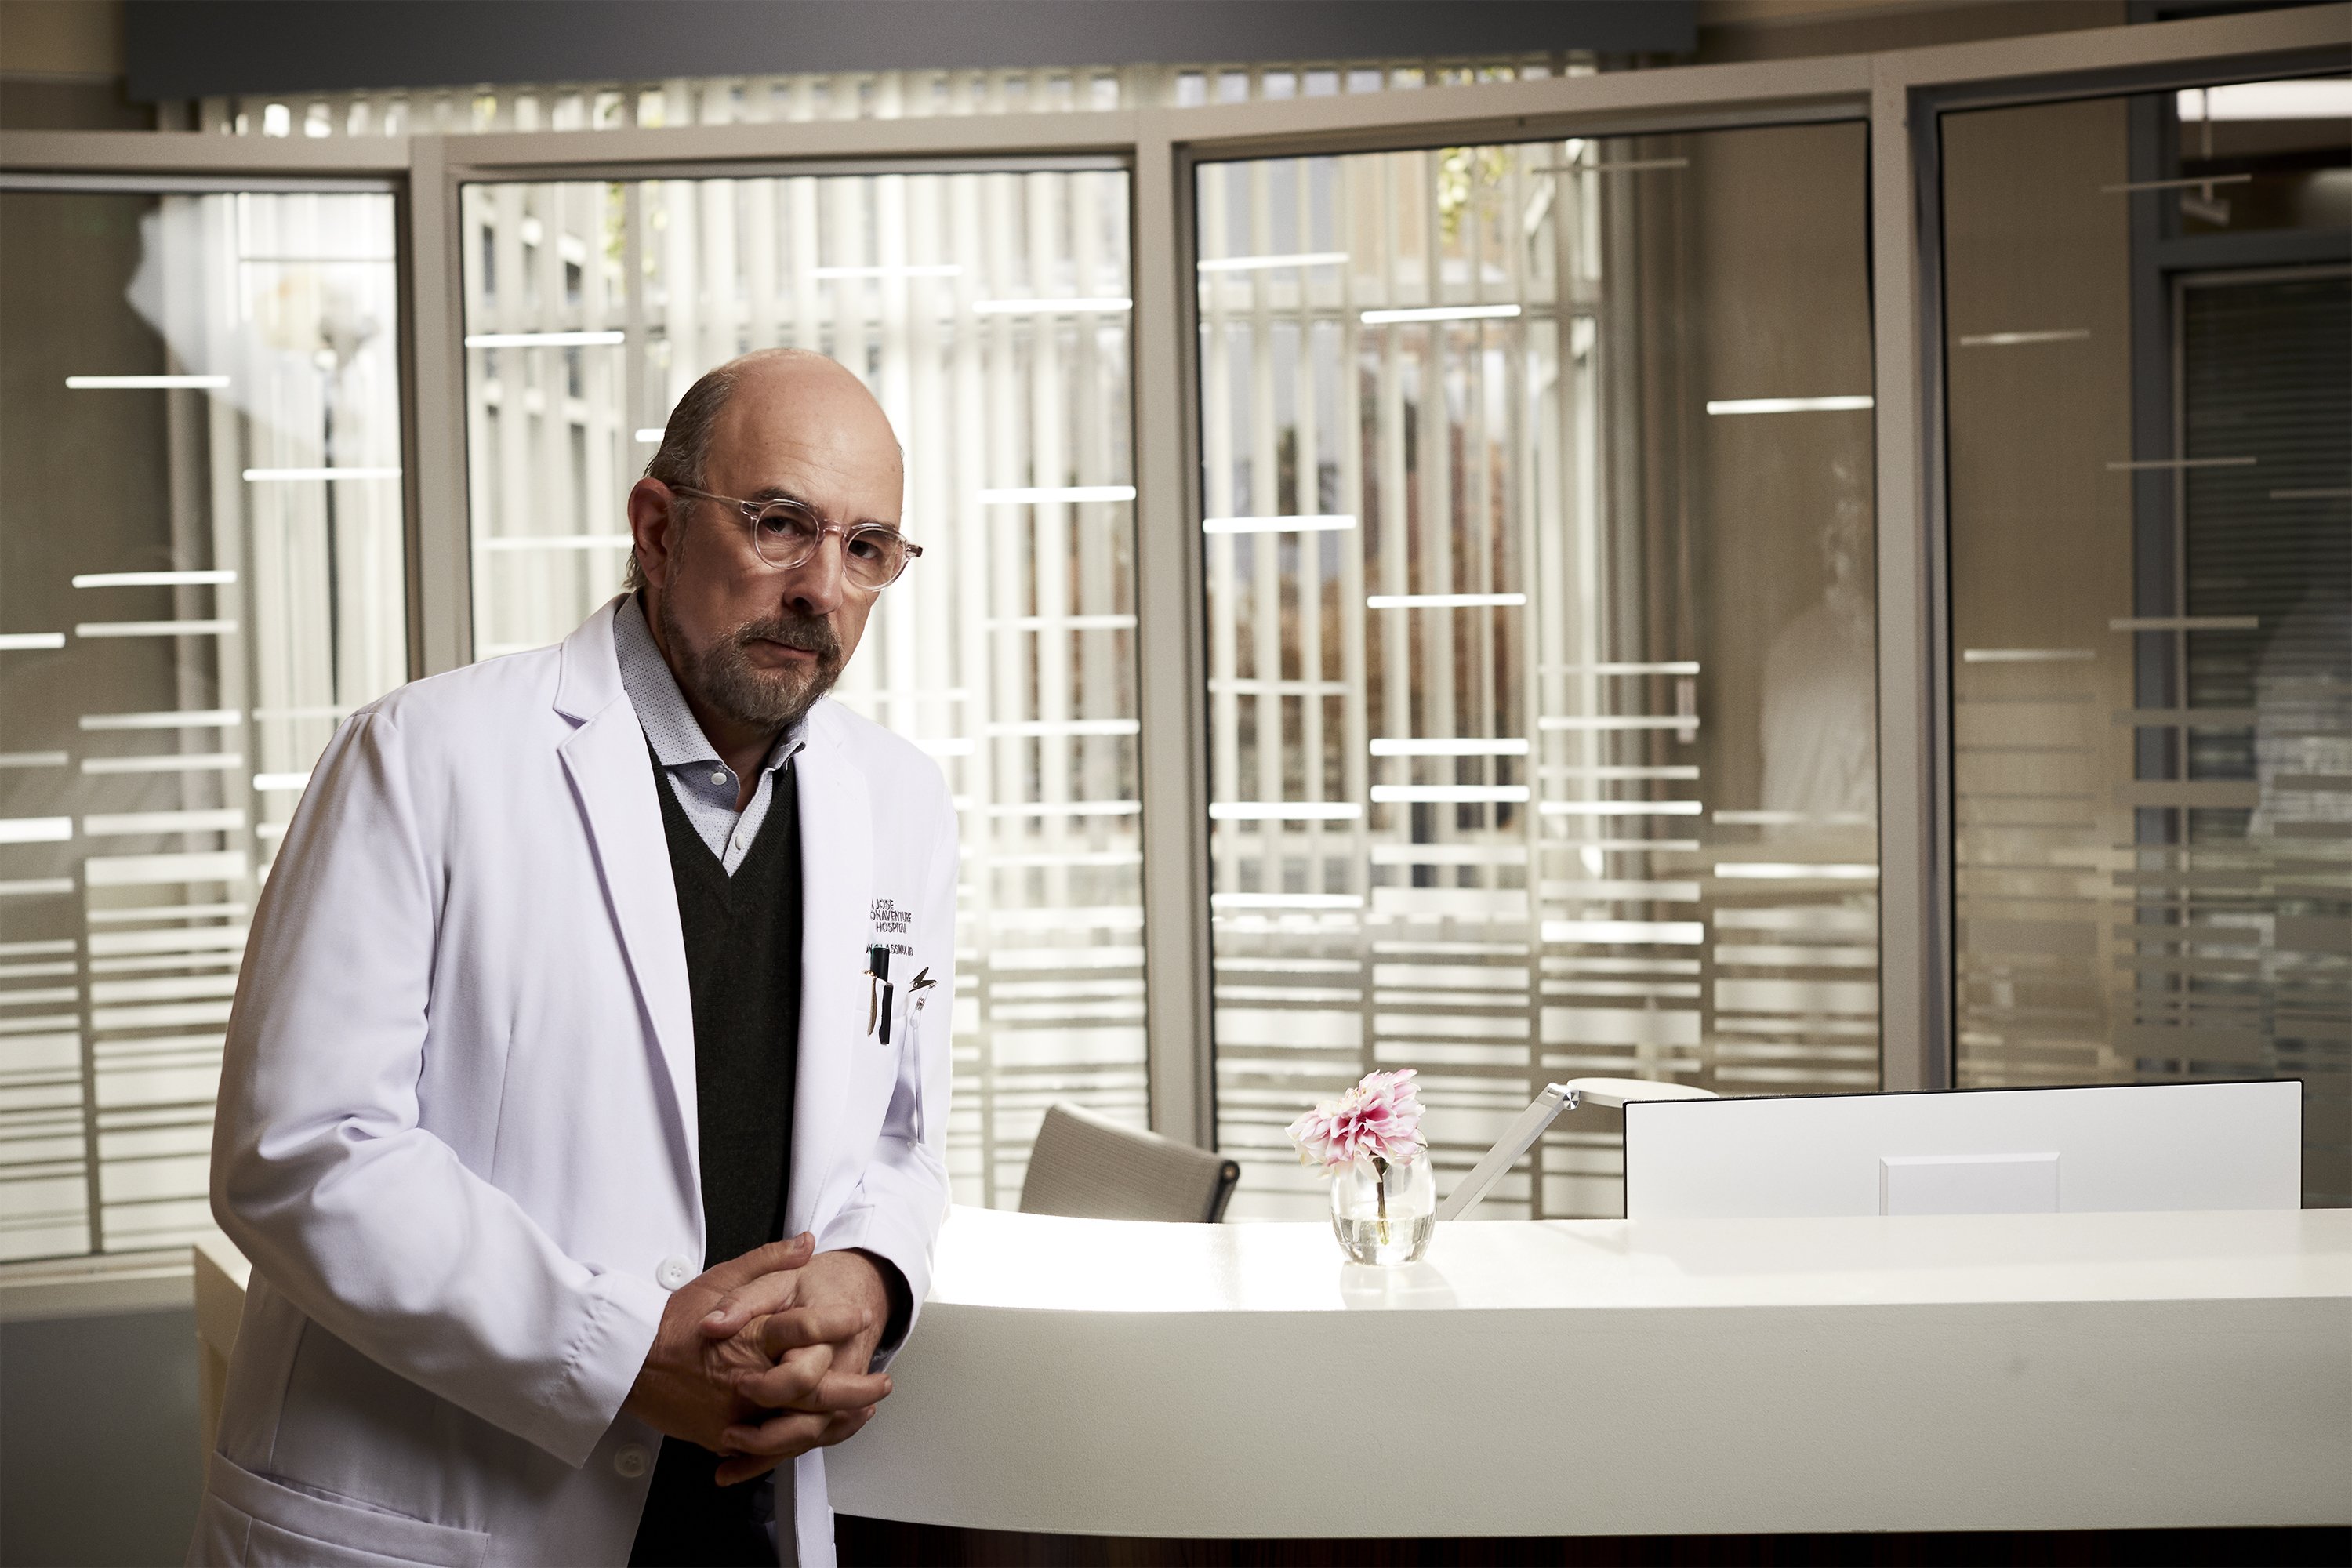 ABC's "The Good Doctor" stars Richard Schiff as Dr. Aaron Glassman. | Source: Getty Images,